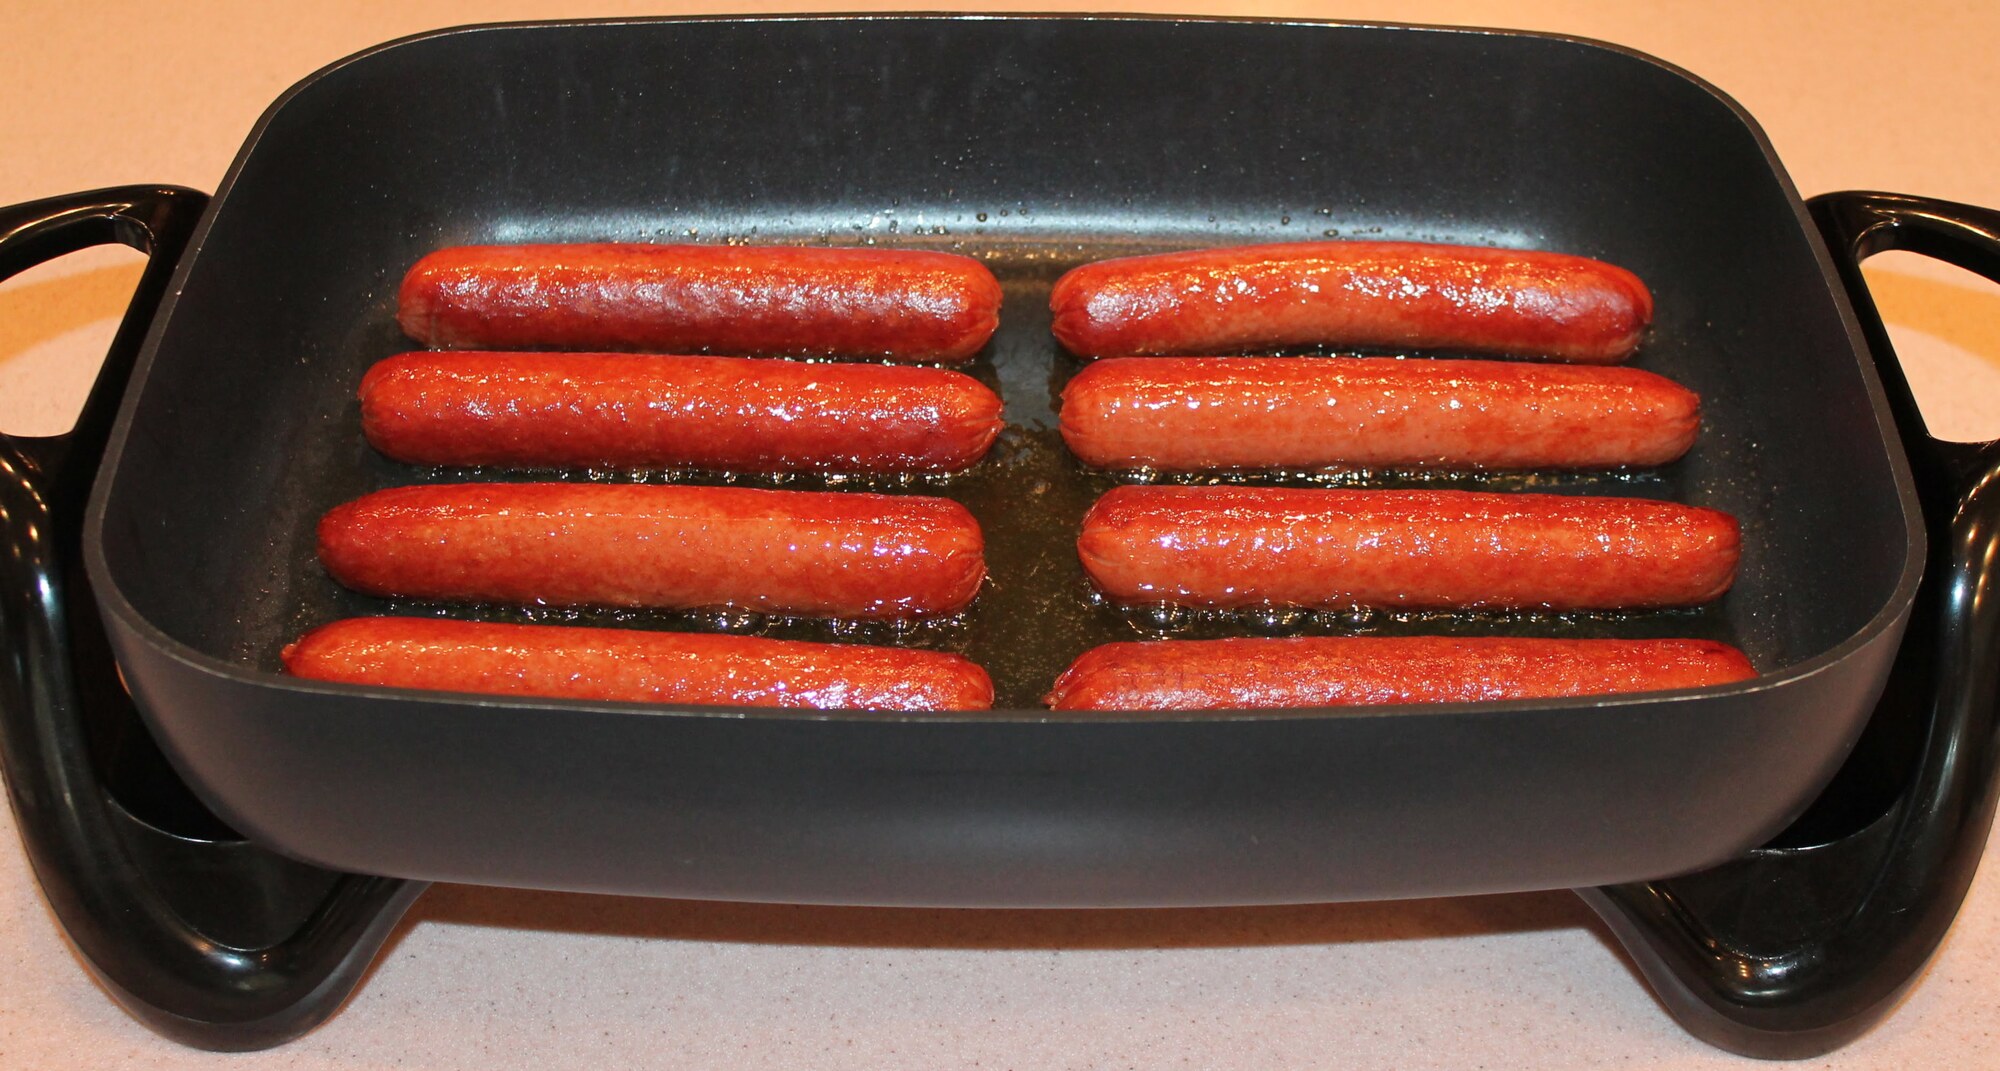 https://storables.com/wp-content/uploads/2023/07/how-long-should-i-cook-a-hot-dog-in-an-electric-skillet-1690188979.jpg